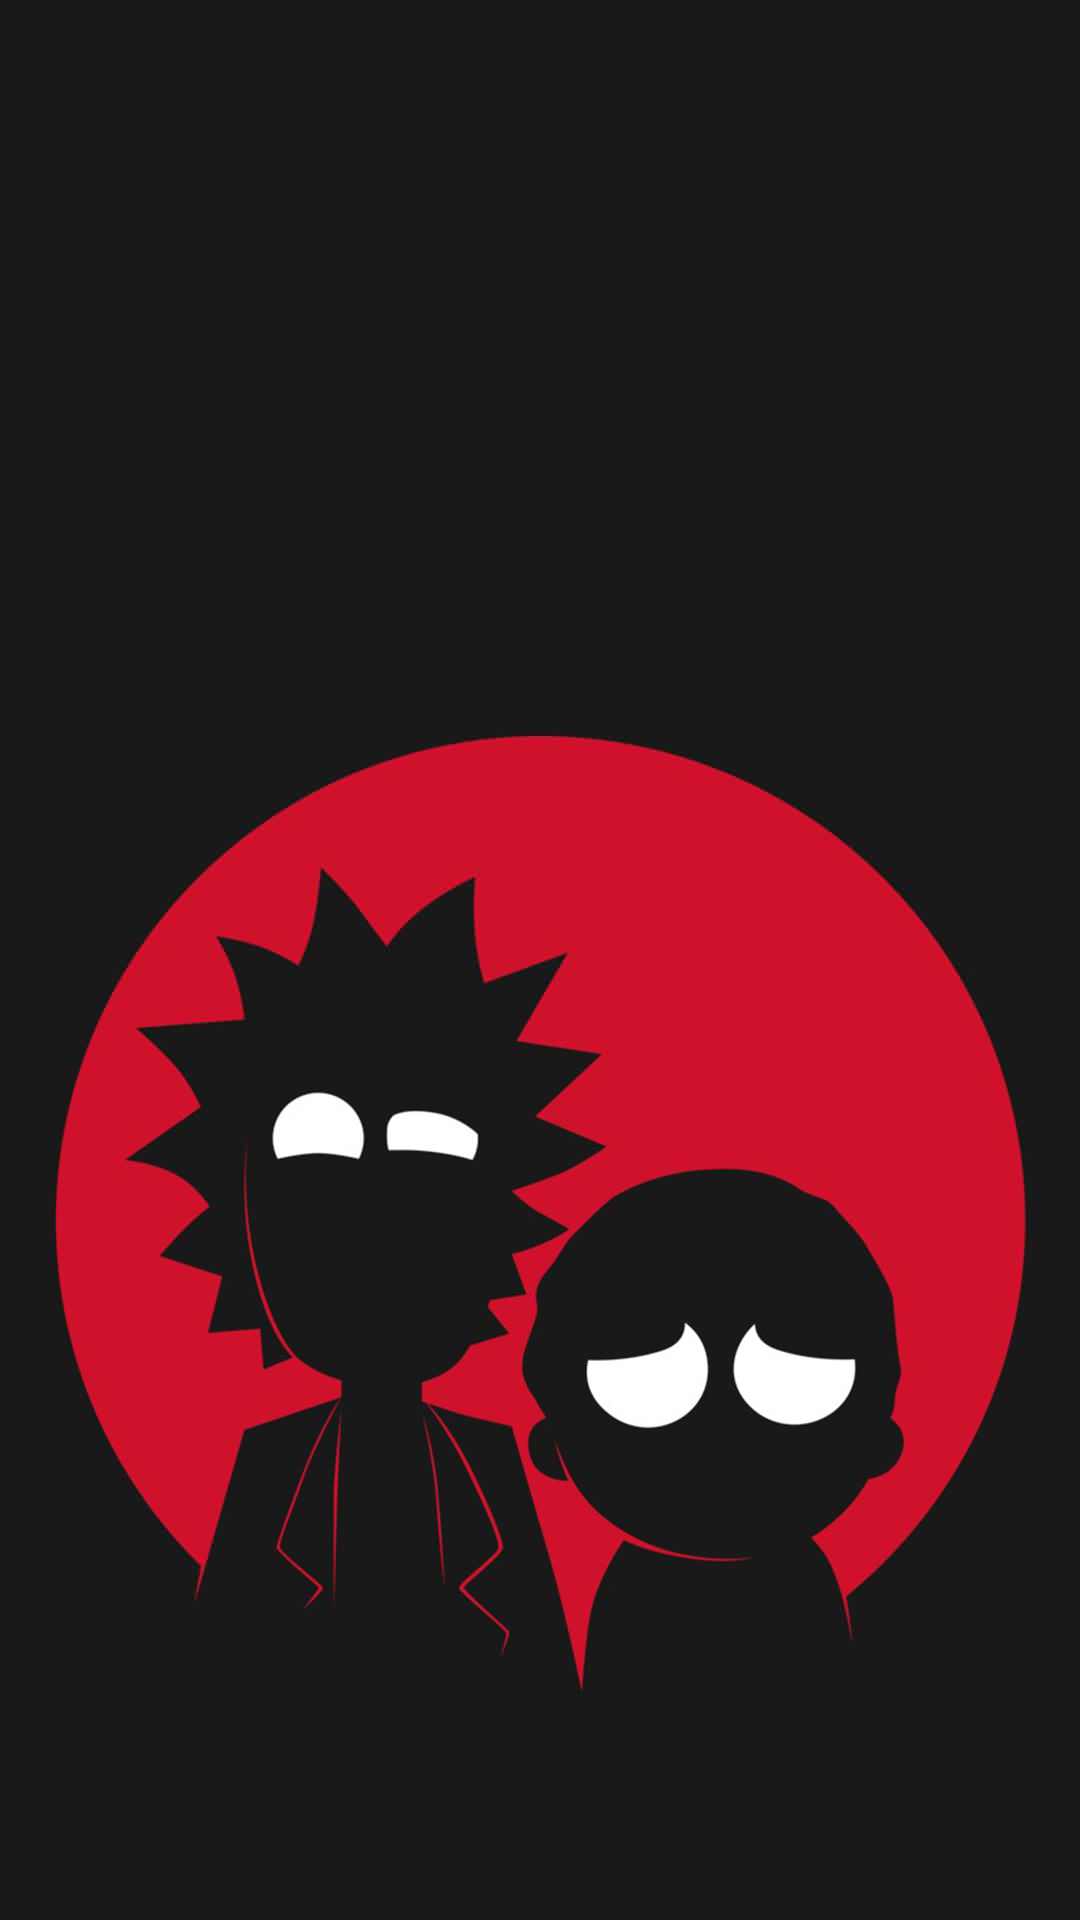 Rick and Morty iPhone Wallpaper Free Rick and Morty iPhone